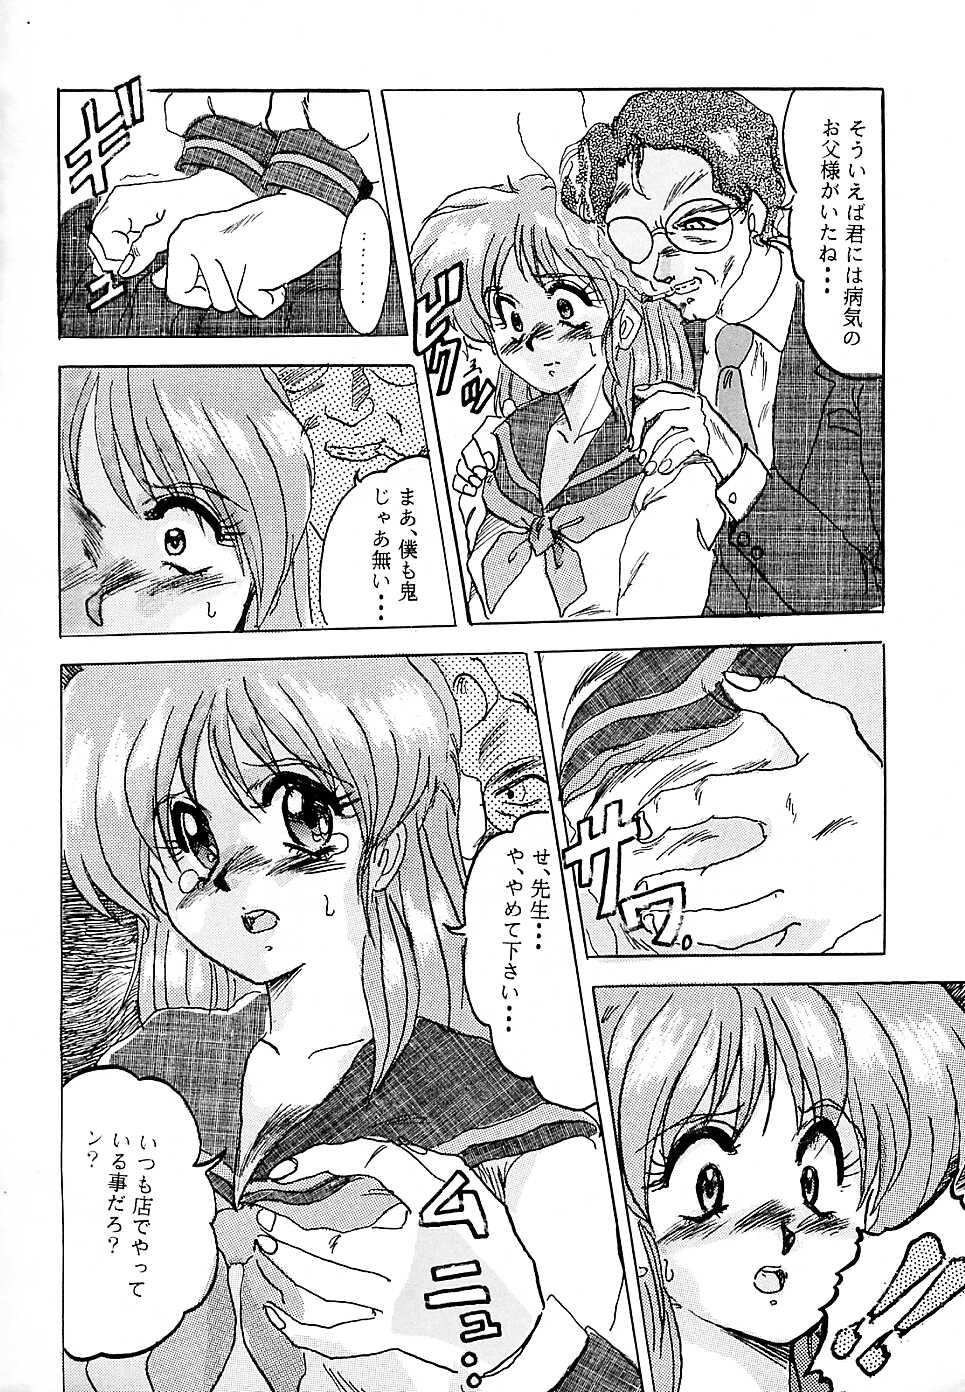 Uncensored F 93C - Brave express might gaine Short - Page 5